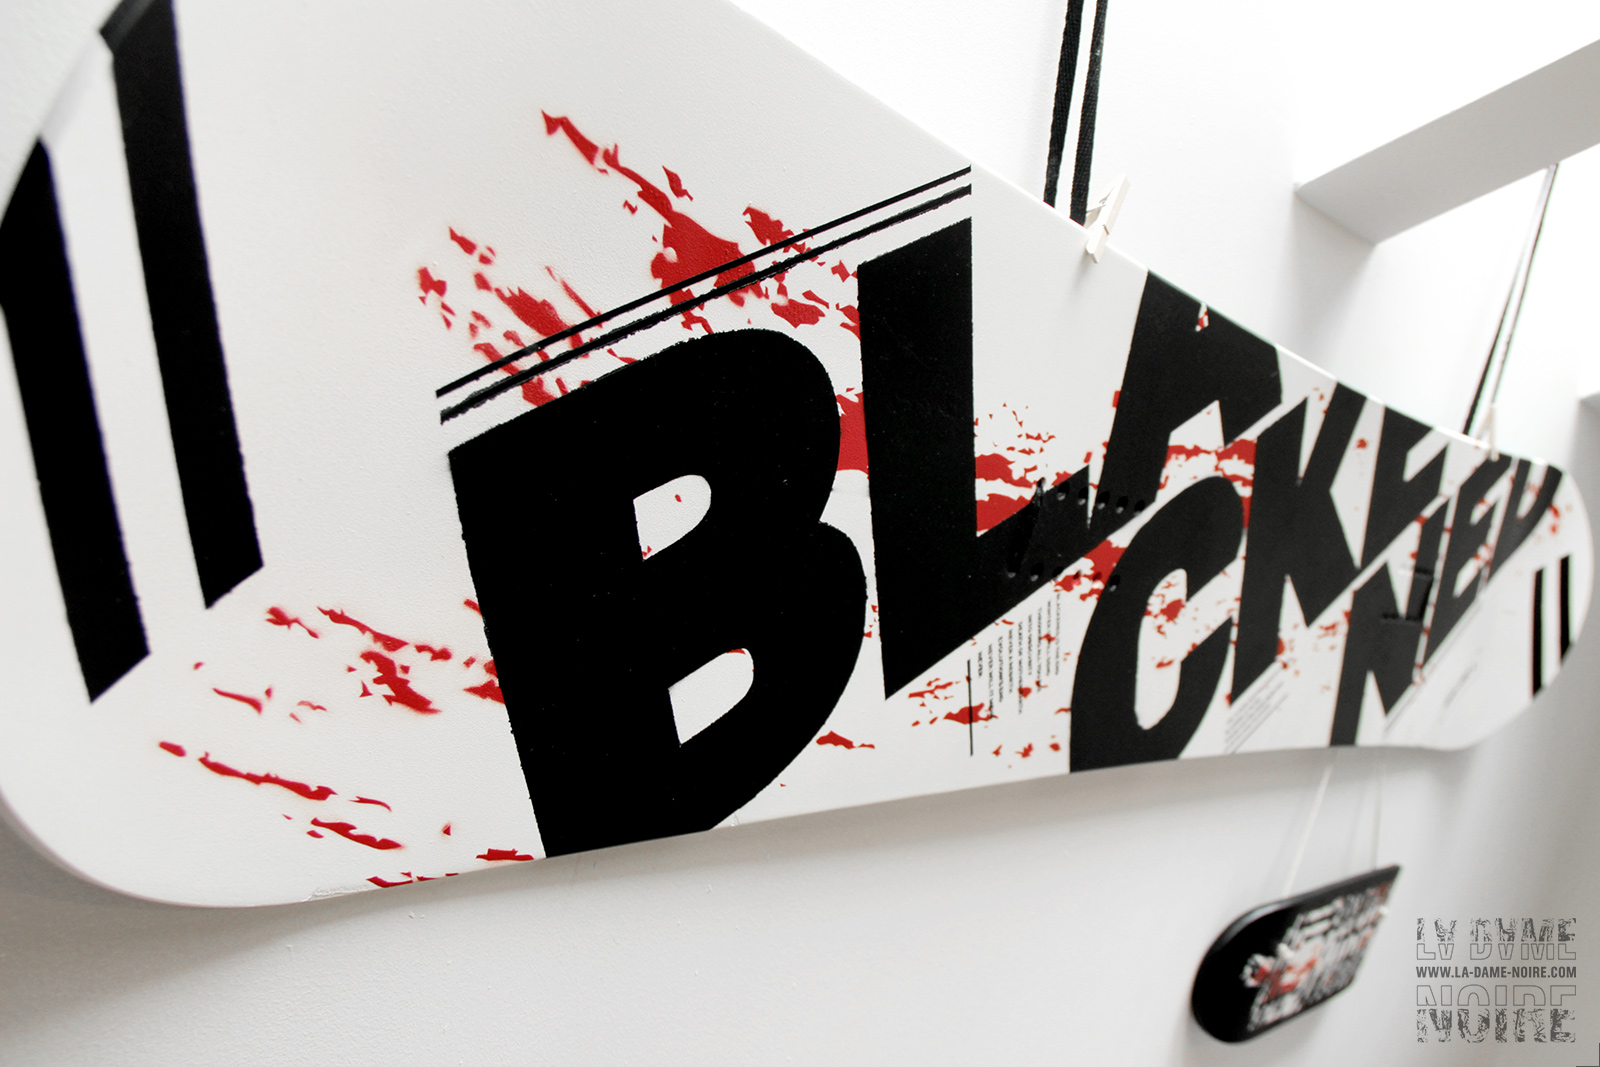 Snowboard painted in black, white, red, and the word Blackened in big bold letters